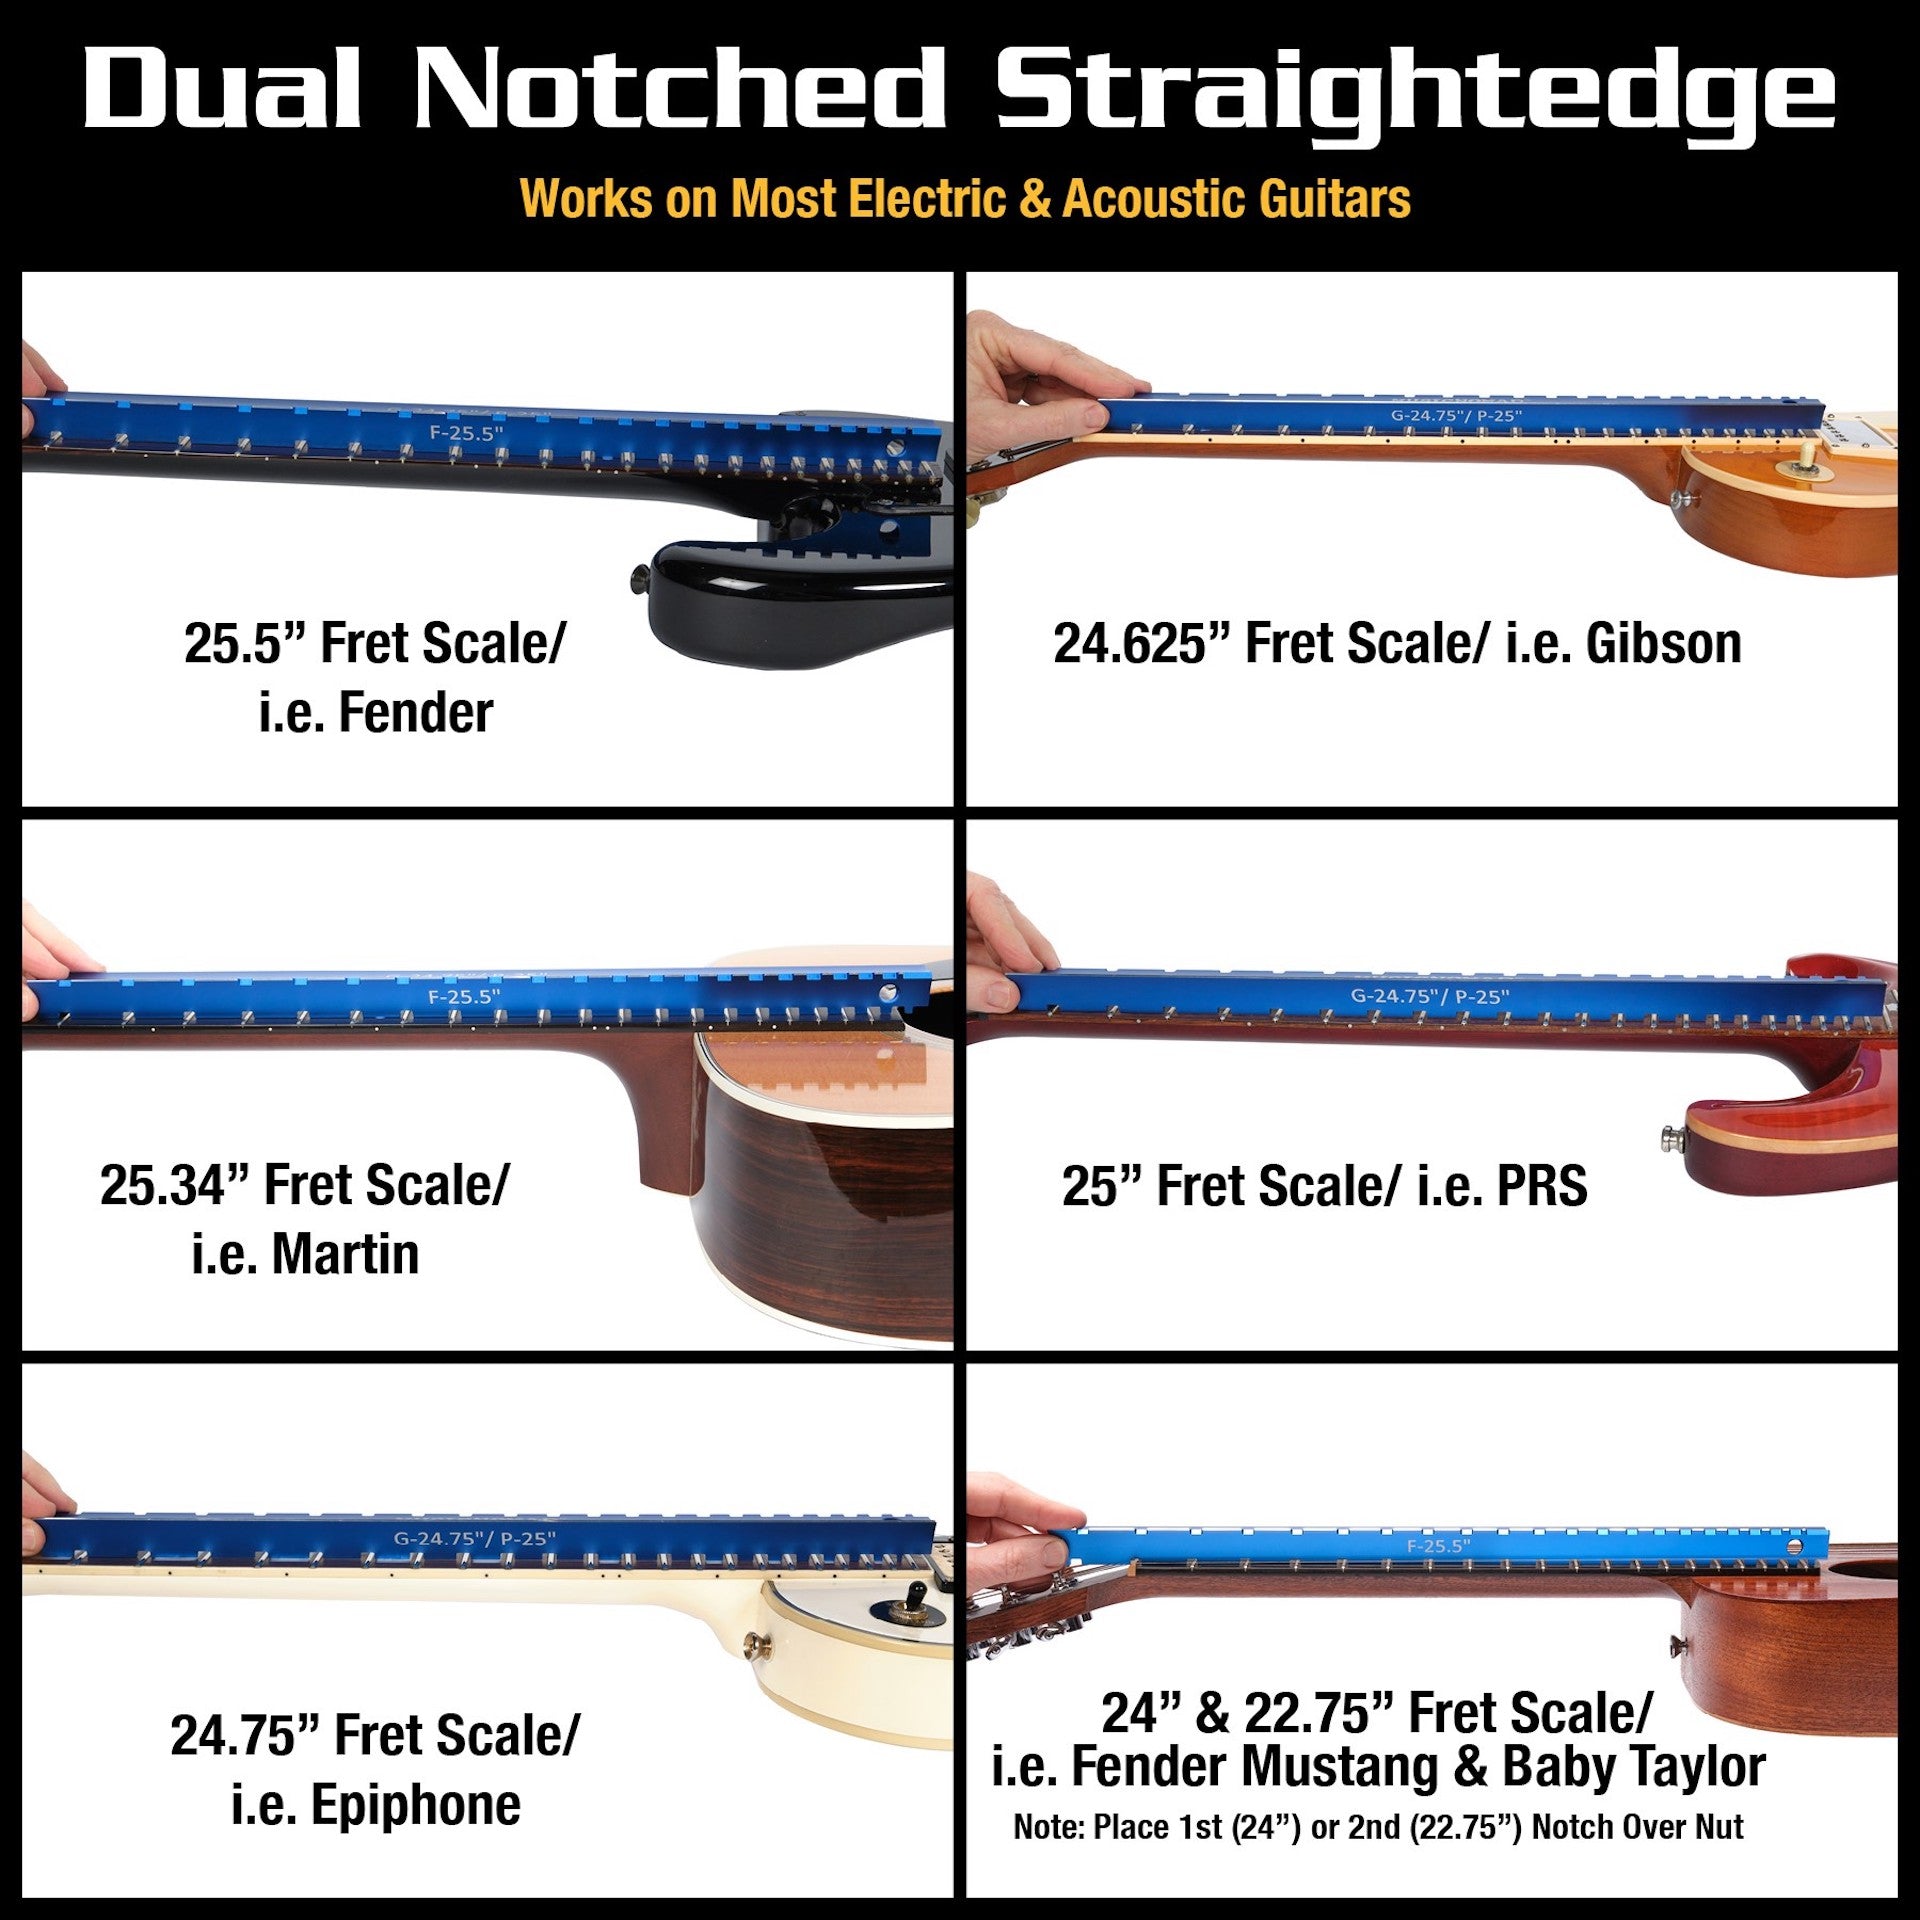 MusicNomad Tri-Beam 3 'n 1 Dual Notched Straightedge & Precision Straightedge for Acoustic and Electric Guitars  (MN821) - HIENDGUITAR   musicnomad musicnomad